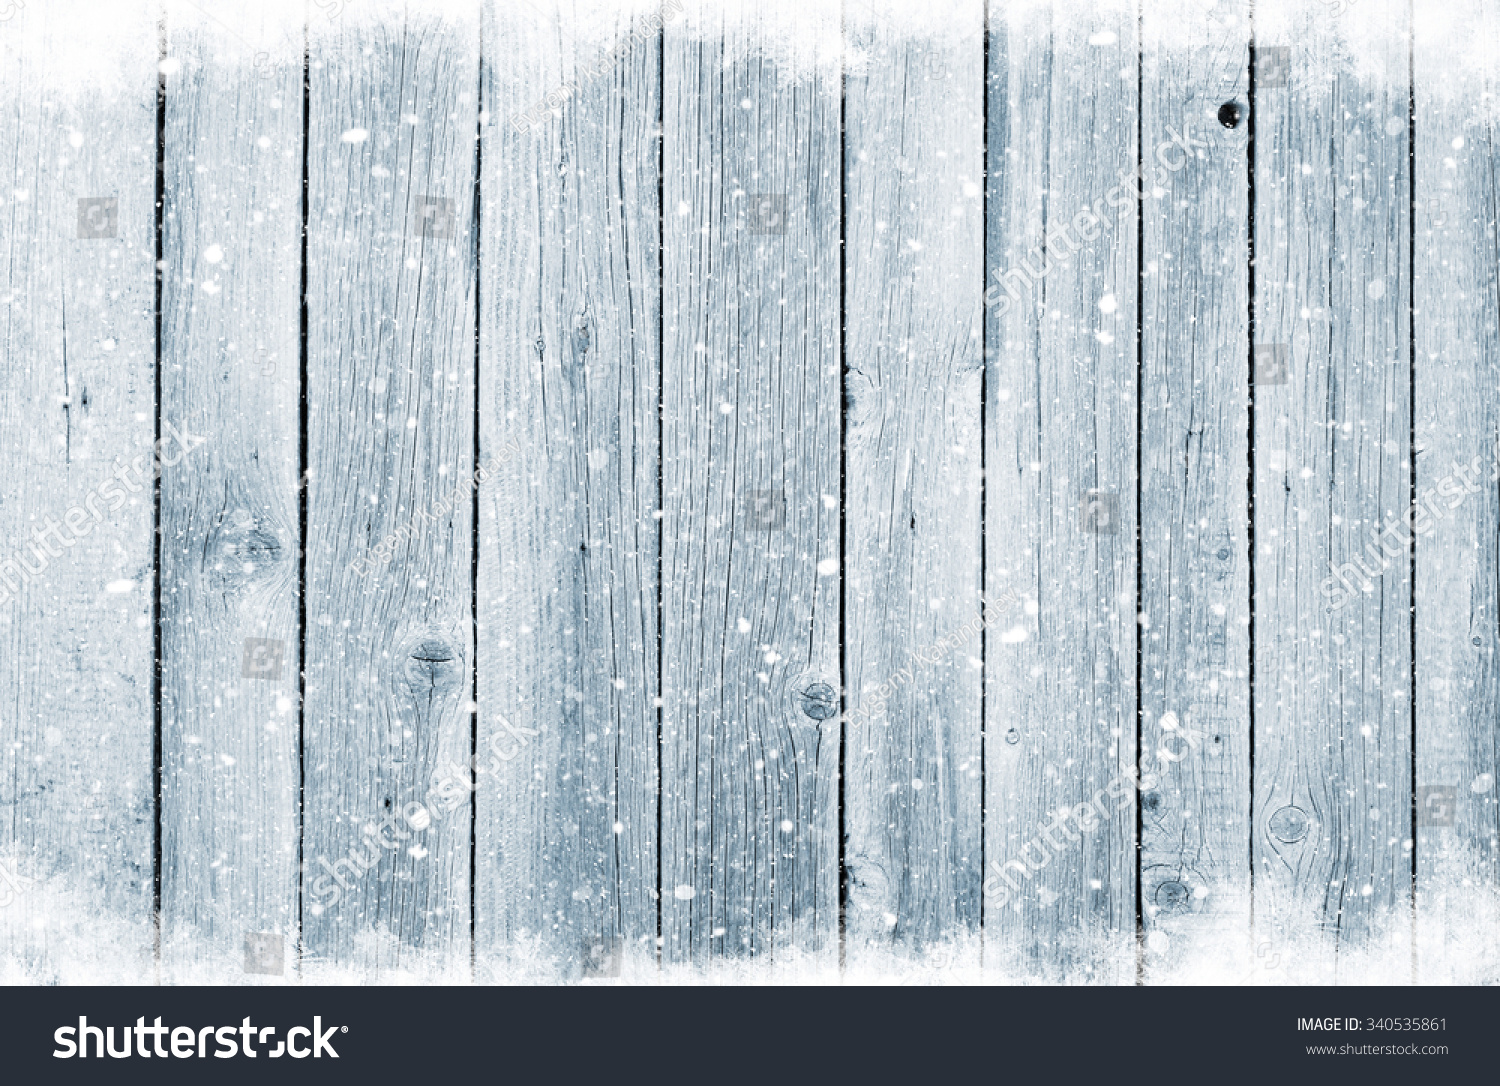 Christmas wooden background with snow #340535861